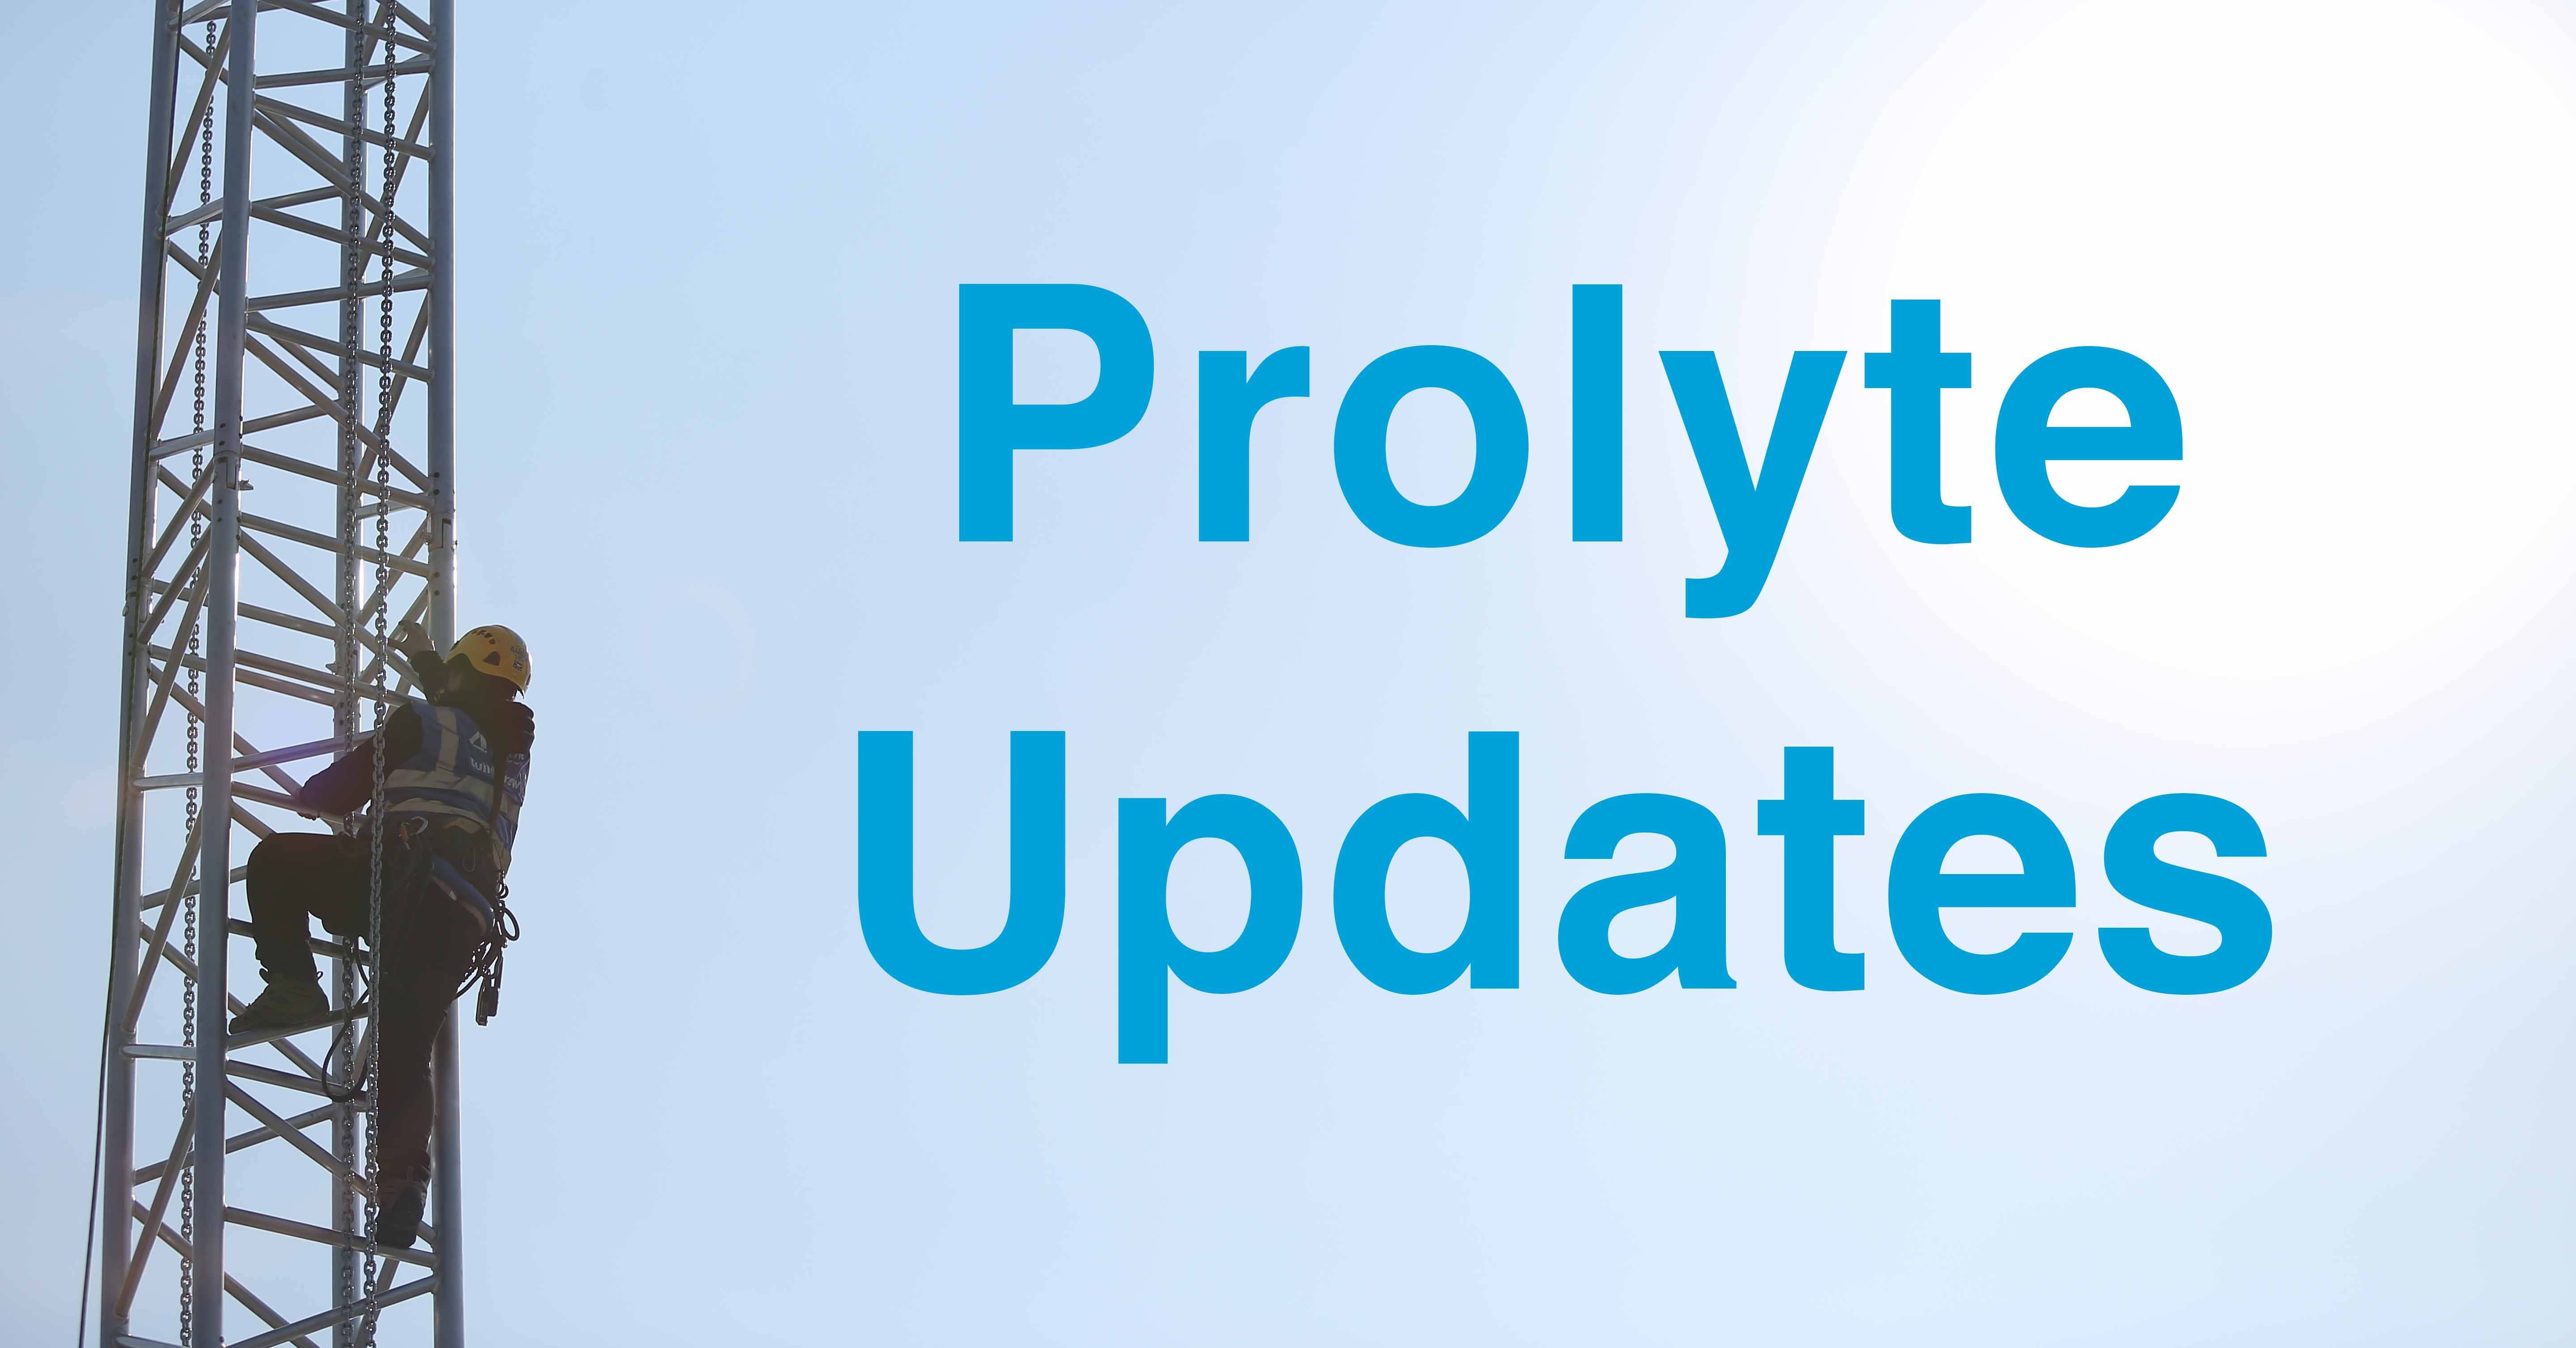 Prolyte completely changes its business model in Asia